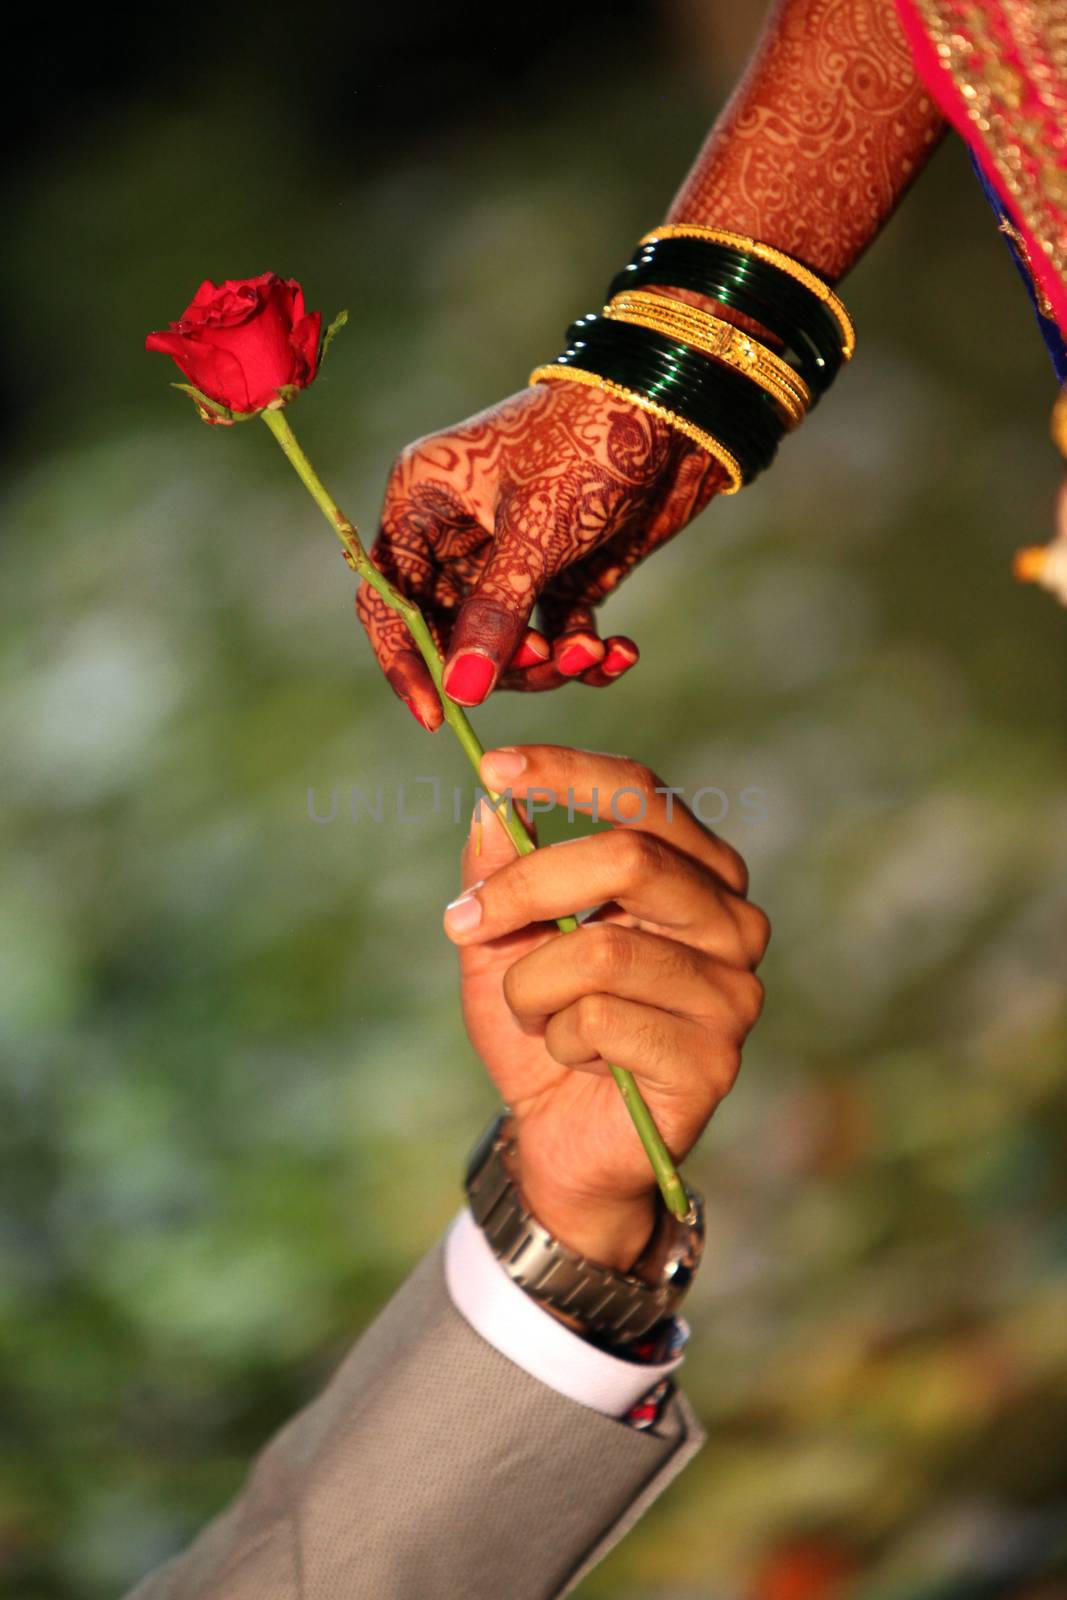 A groom offering a red rose to his bride whose hand is beautifully decorated with traditional bangles and mehendi